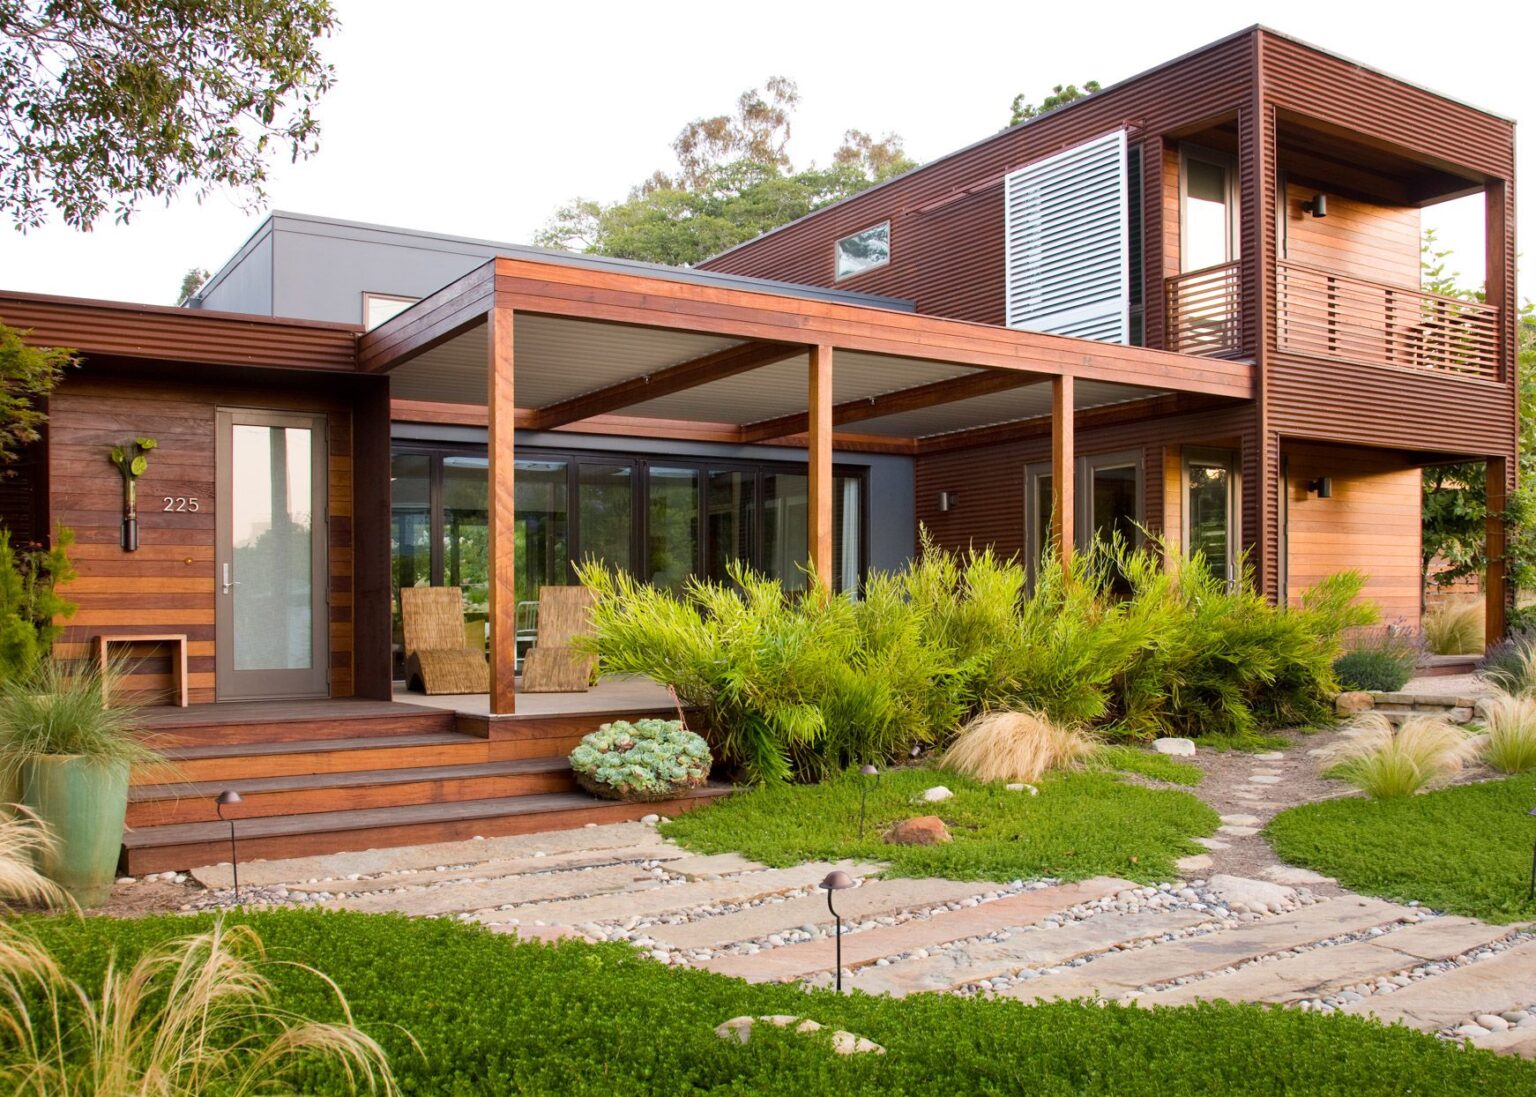 Sustainable Homes: Architecture for a Sustainable Future